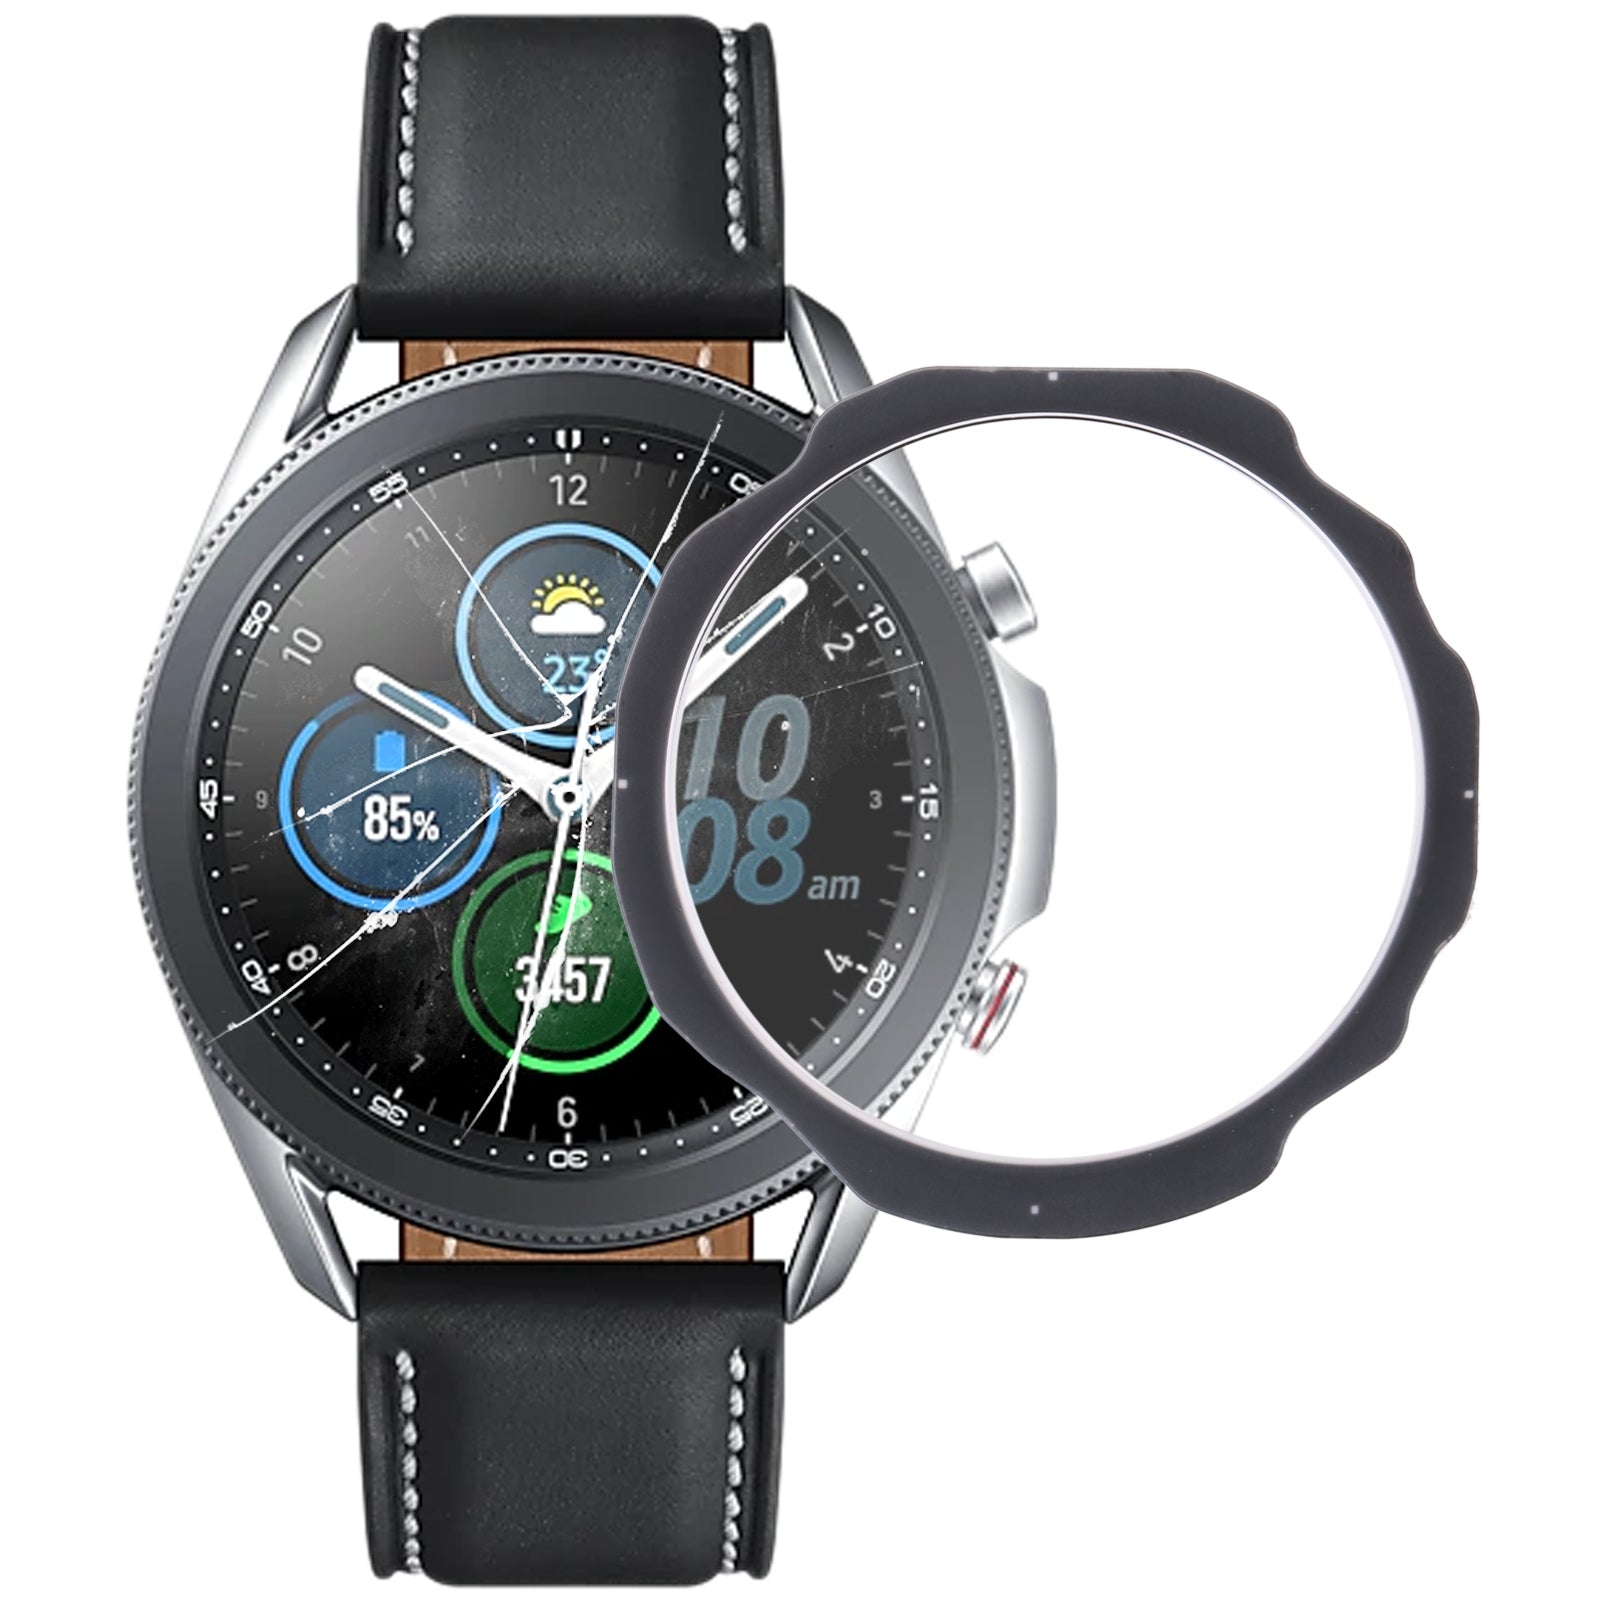 Outer Glass Front Screen Samsung Galaxy Watch 3 45mm R840 / R845 Black